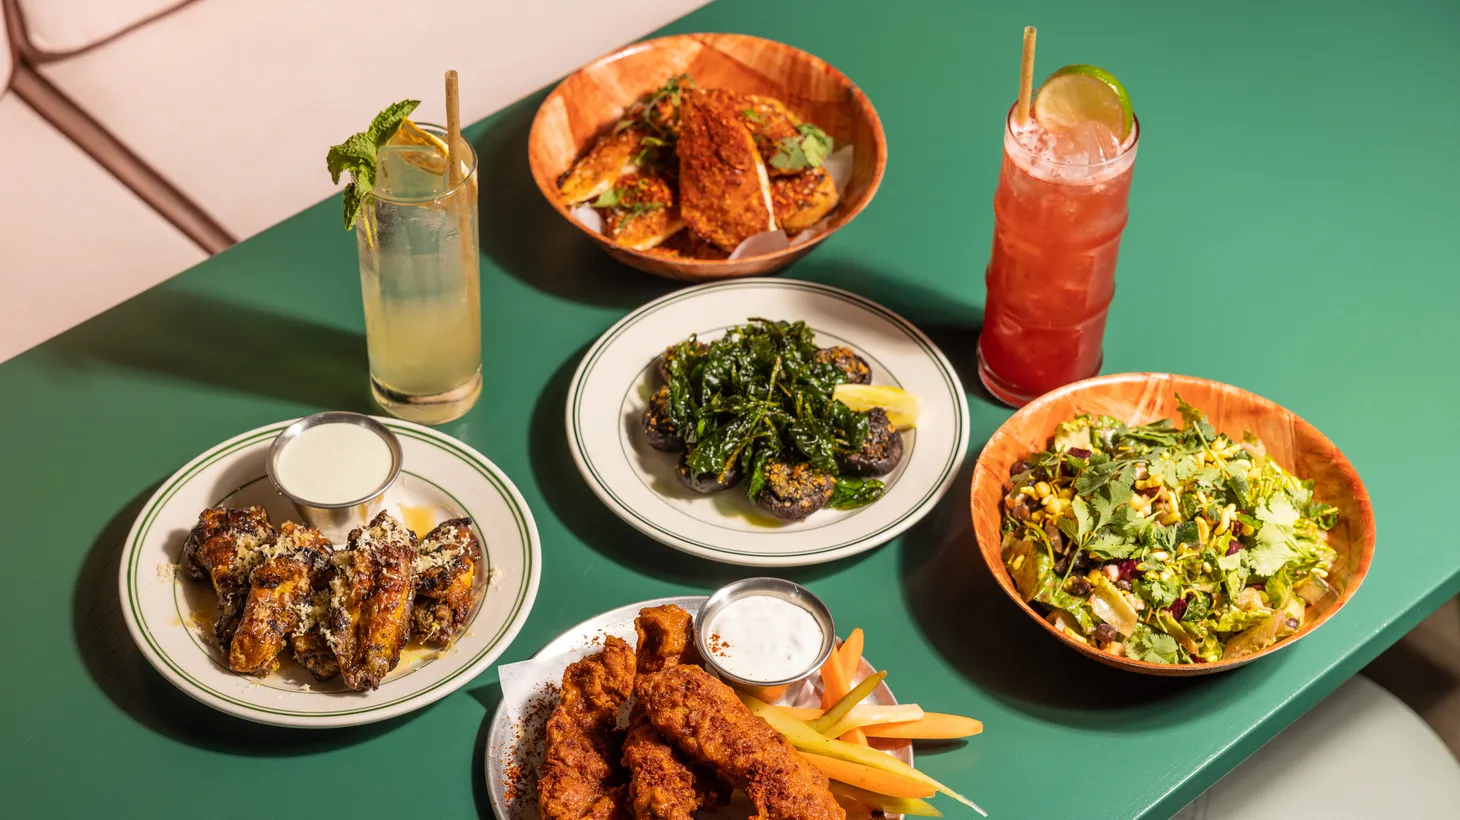 With 80 seats, Pijja Palace is a cozy, Silver Lake sports bar serving a mashup of traditional fare with Italian-American and owner Avish Naran’s Indian heritage.